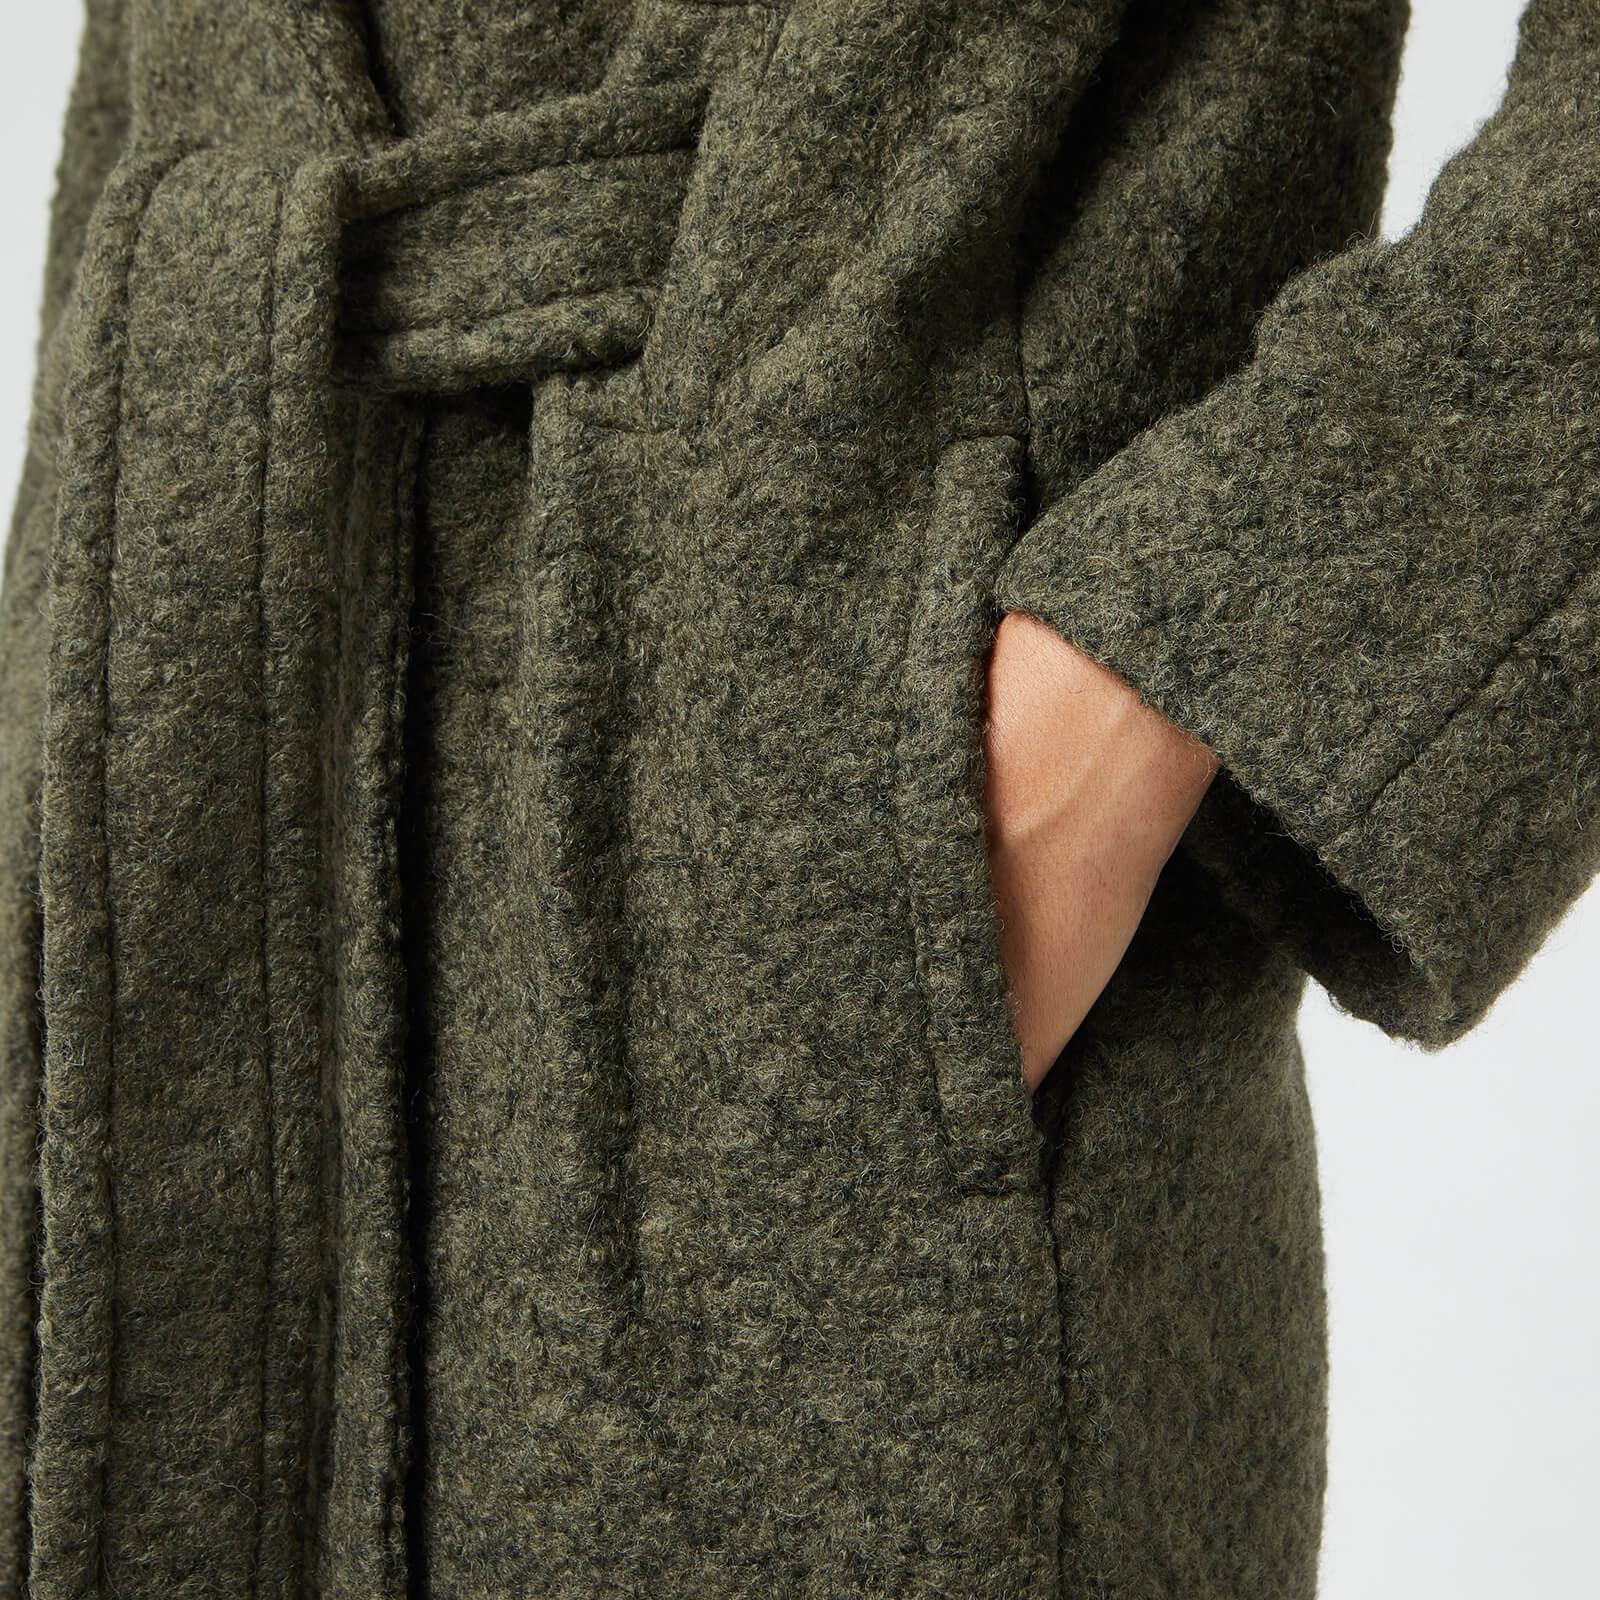 Ganni Boucle Wool Belted Coat in Green - Lyst